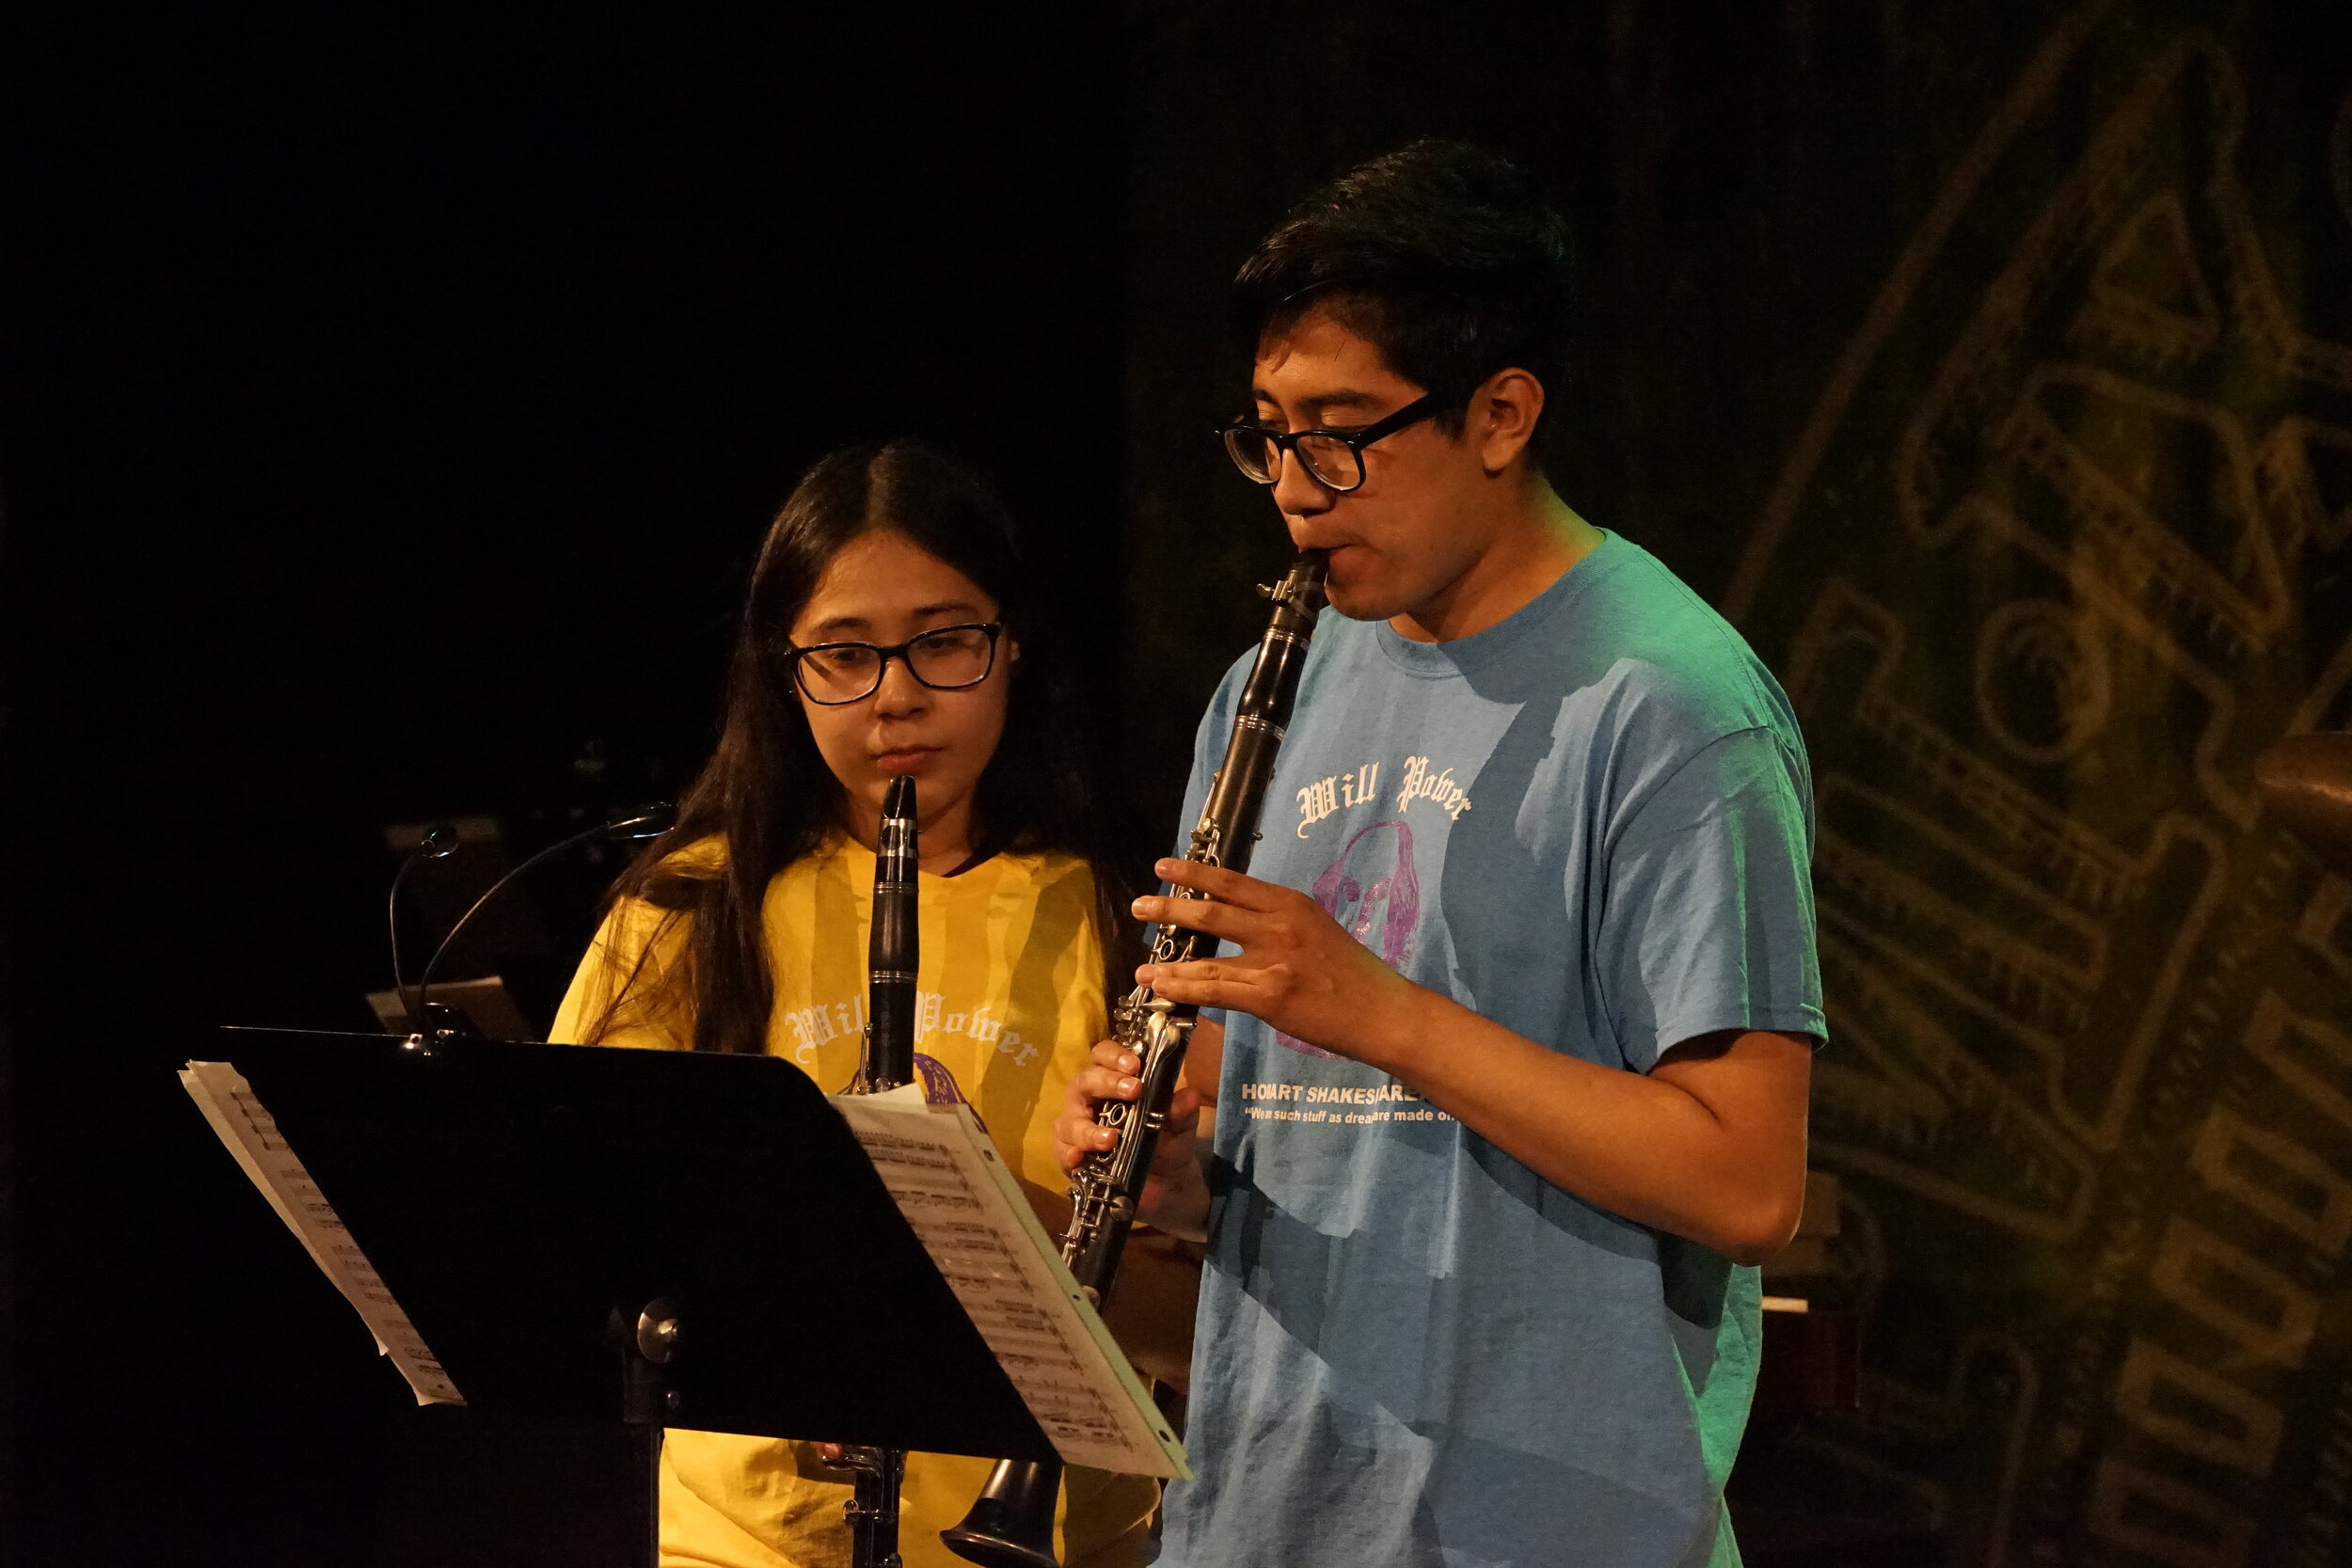  Ashley and Claudio play clarinets to usher in Spring after a tragic Winter 